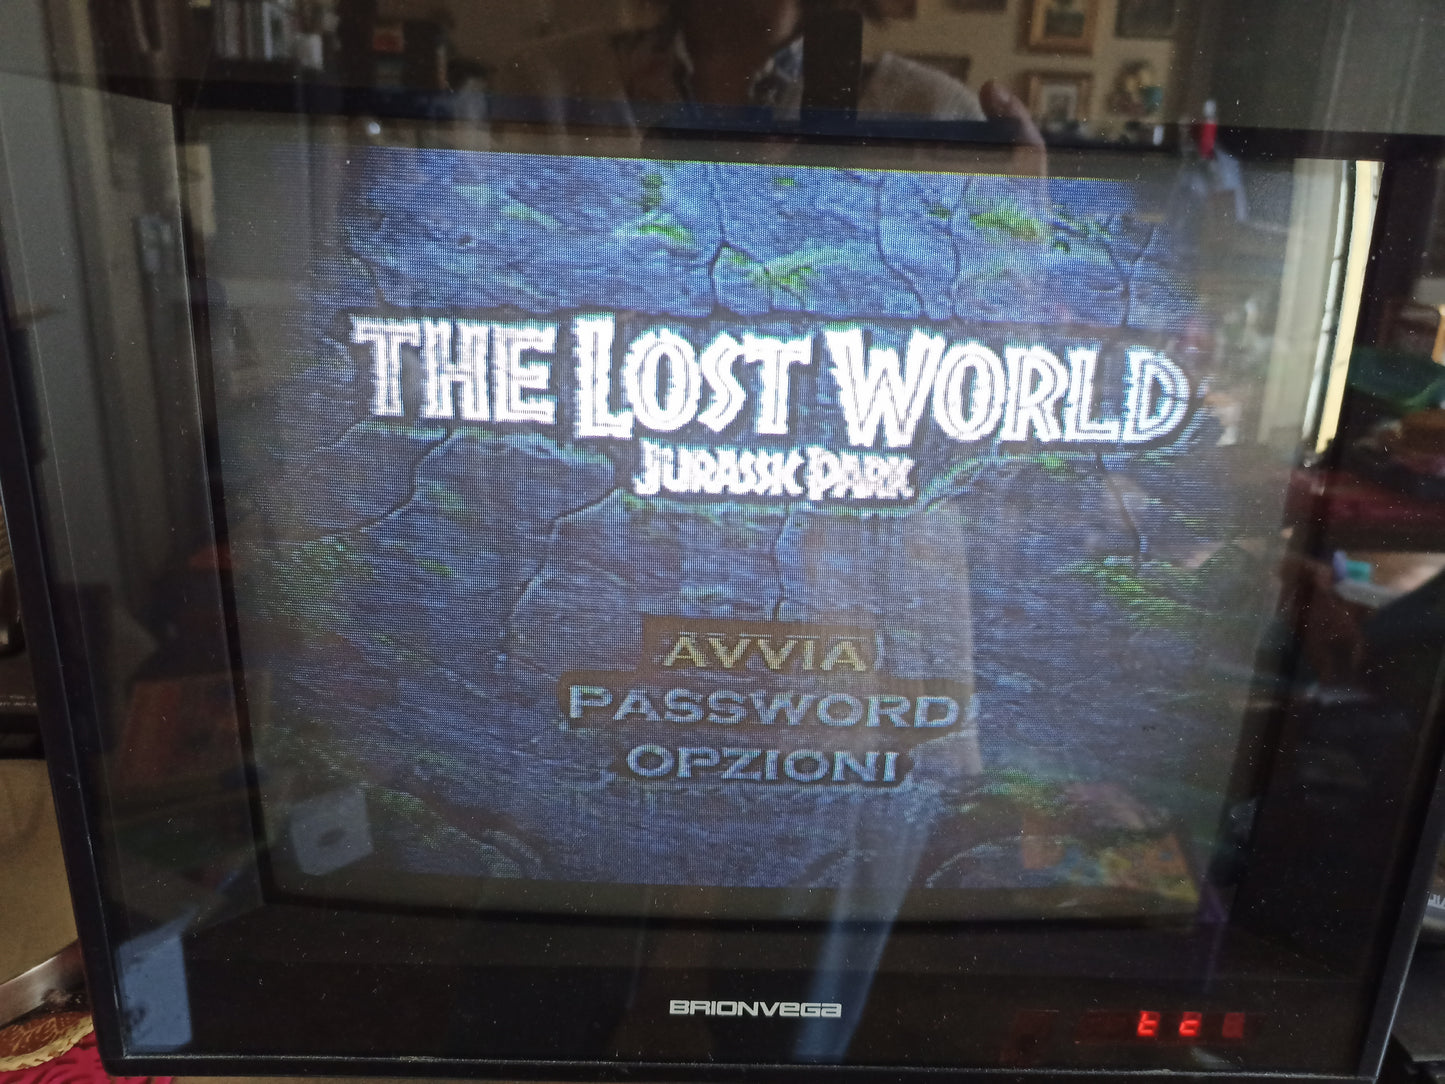 The Lost World Jurassic Park video game for PS1